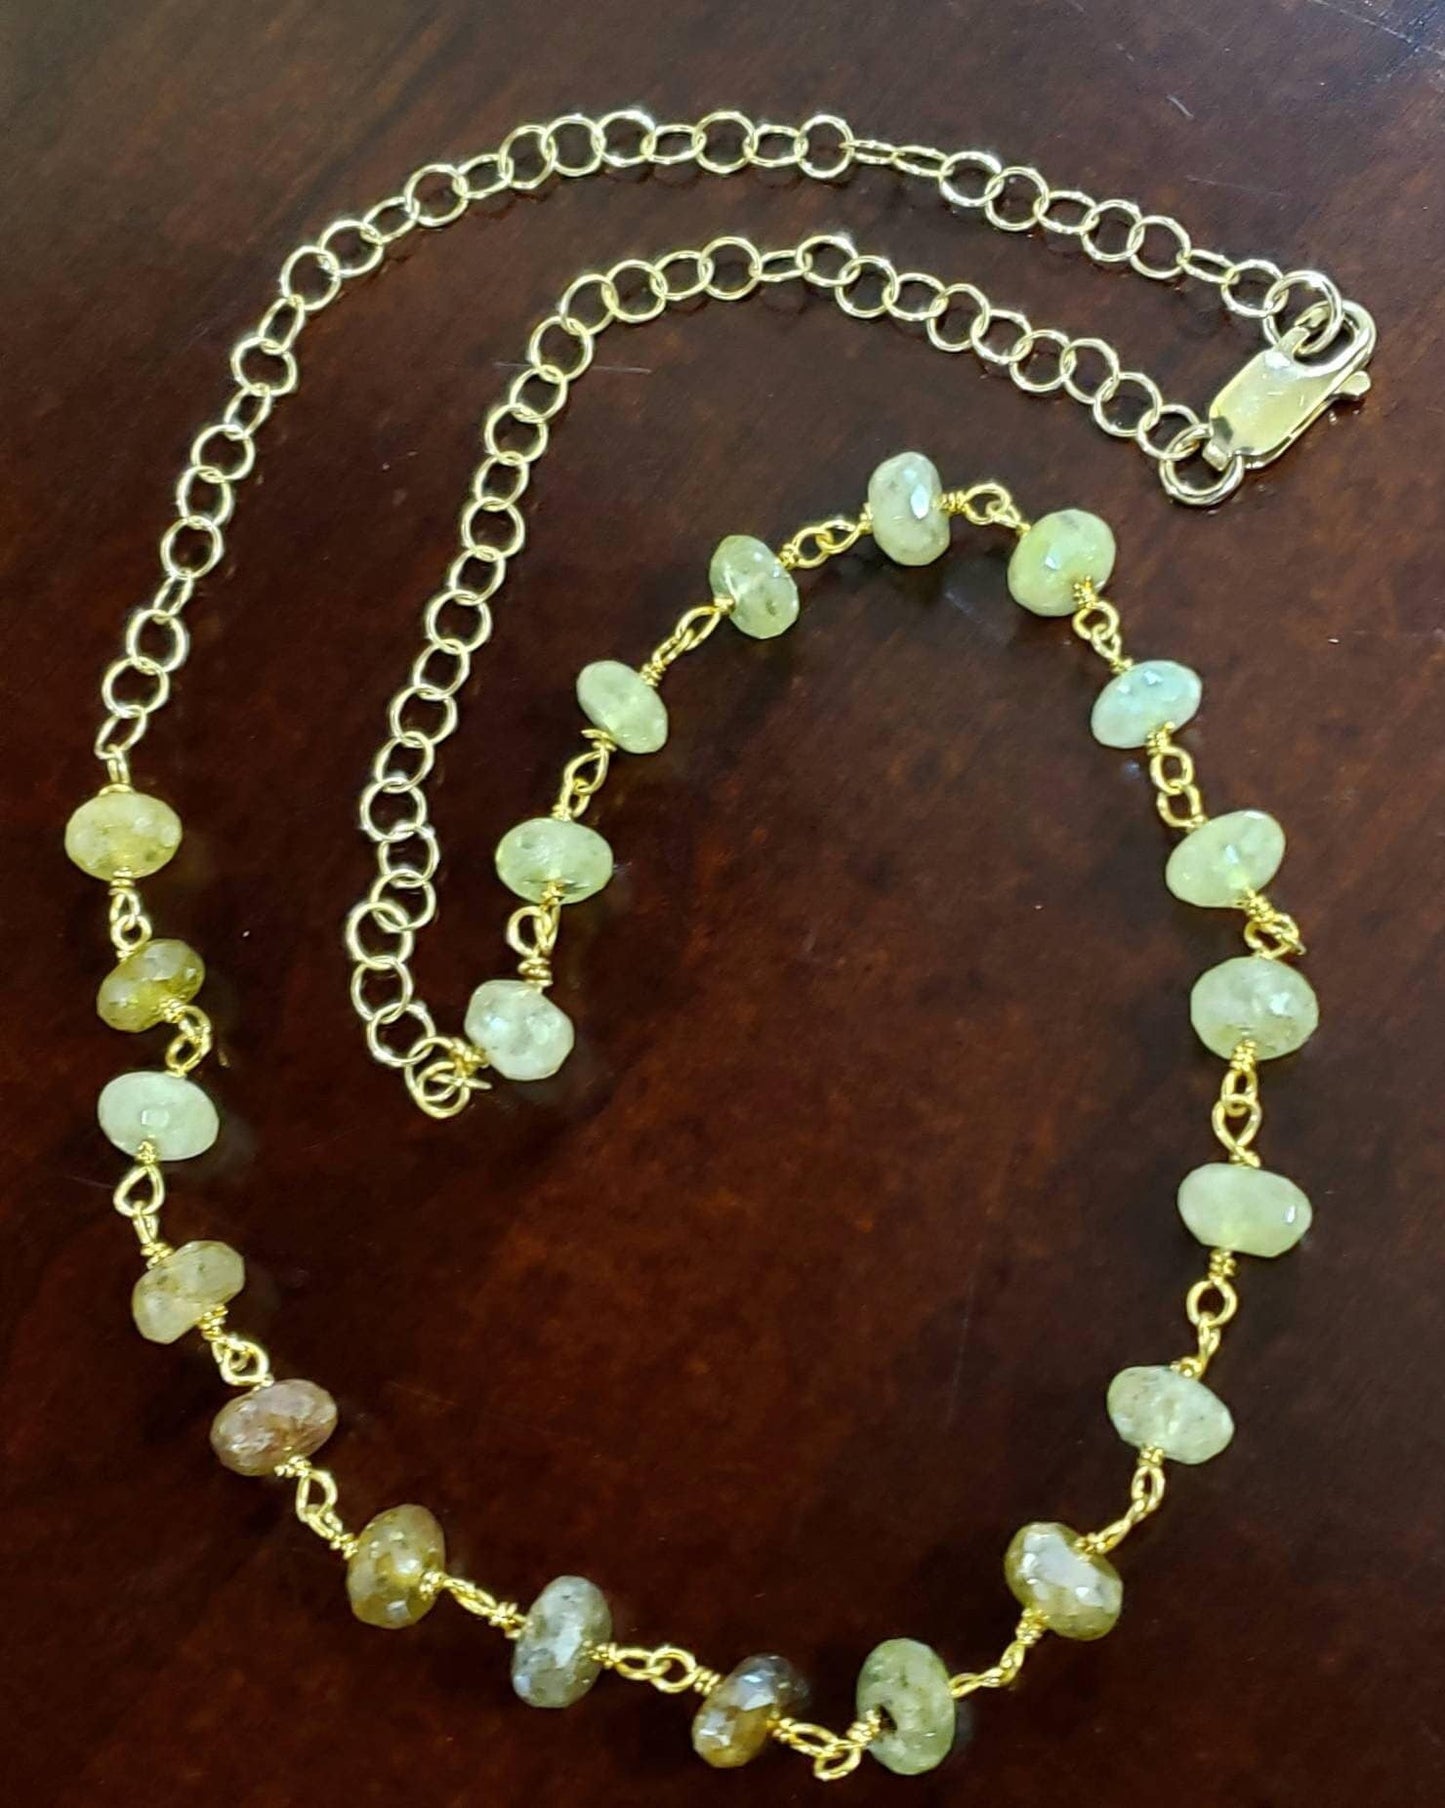 Natural Grossular Garnet, green garnet 6mm large Faceted Diamond Cut Roundel handmade wire wrapped in 14K Gold Filled Necklace.